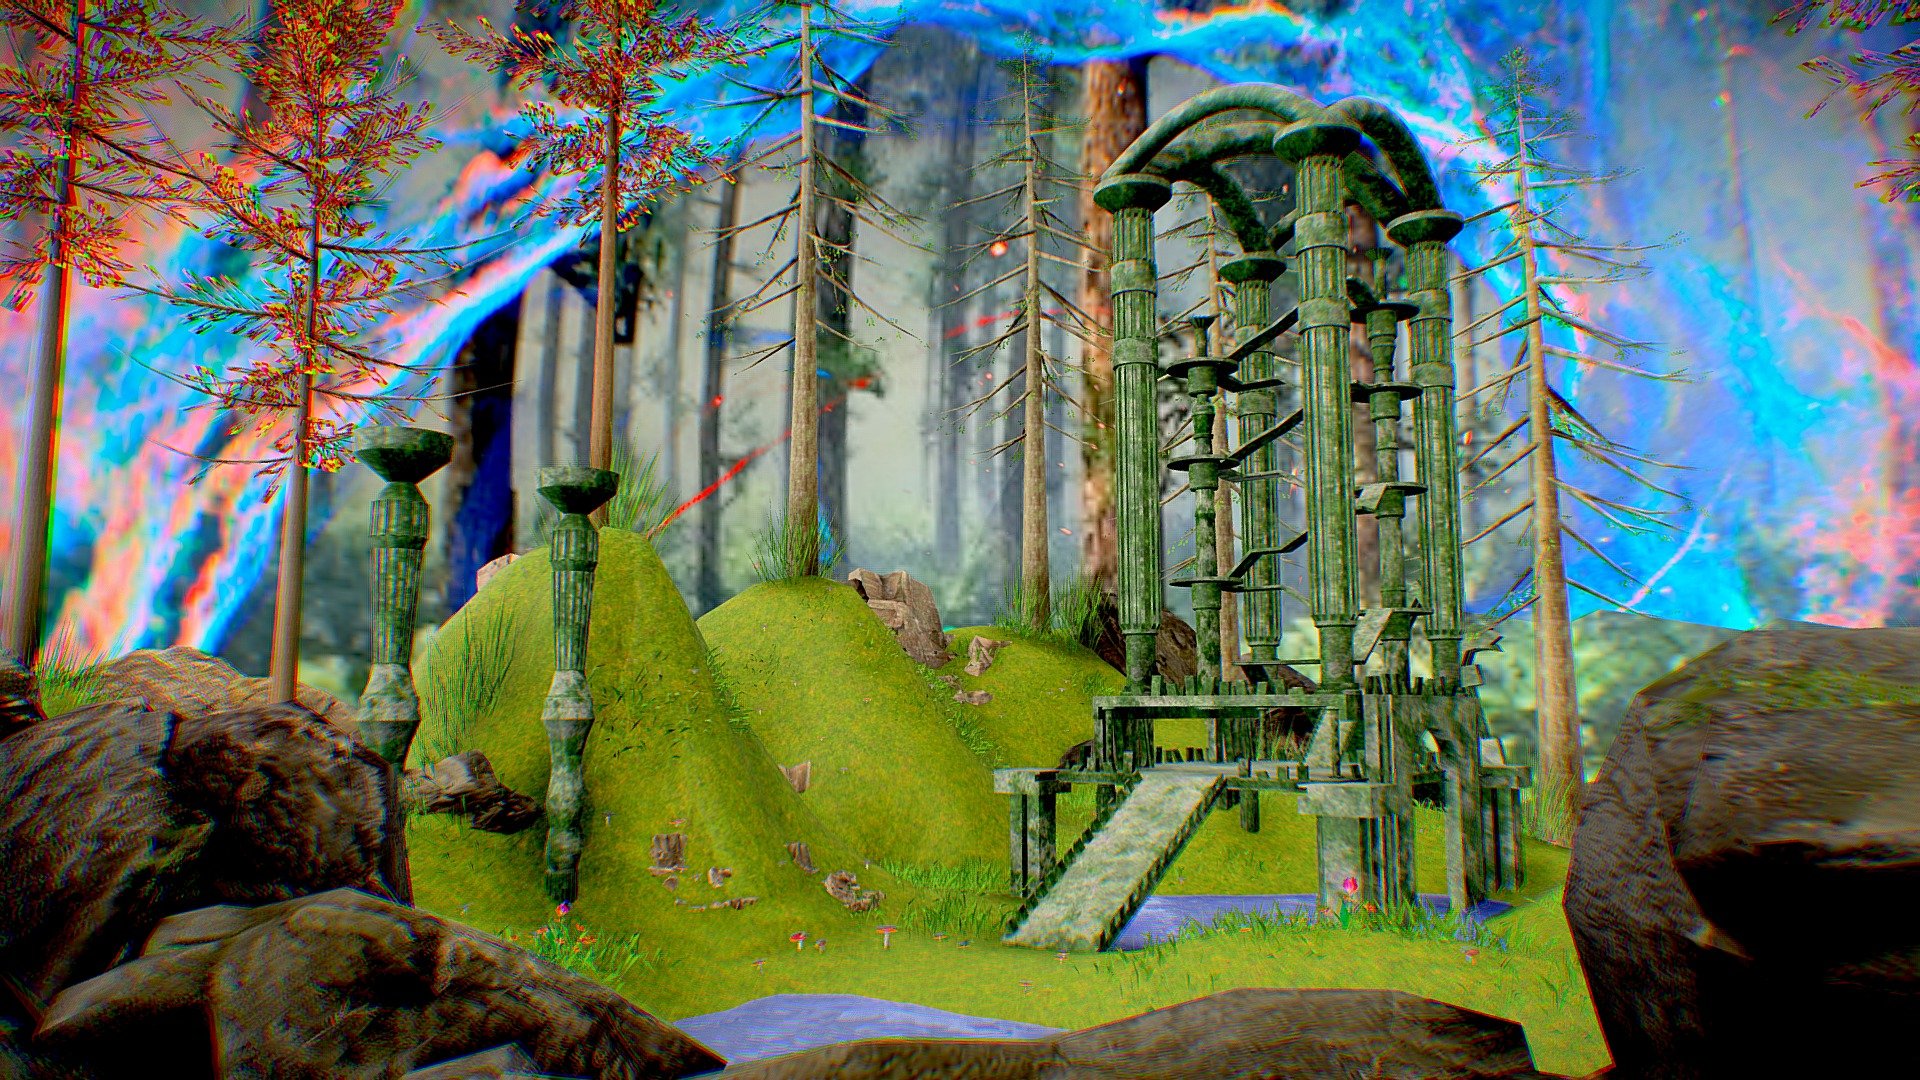 It is a surreal scenario created especially for meditation or virtual exploration, among other functions.

Try our space in Spatial before you buy it (FREE) https://www.spatial.io/s/Xilitla-Adventure-Marco-Virtual-MX-64475308ce8f256cd88151f8?share=6489805817650721349

Visit our new website: https://www.marcovirtual-mx.com/ - Metaverse Xilitla  forest |Baked| VR/AR Ready - Buy Royalty Free 3D model by Marco Virtual MX (@marco_virtual) 3d model